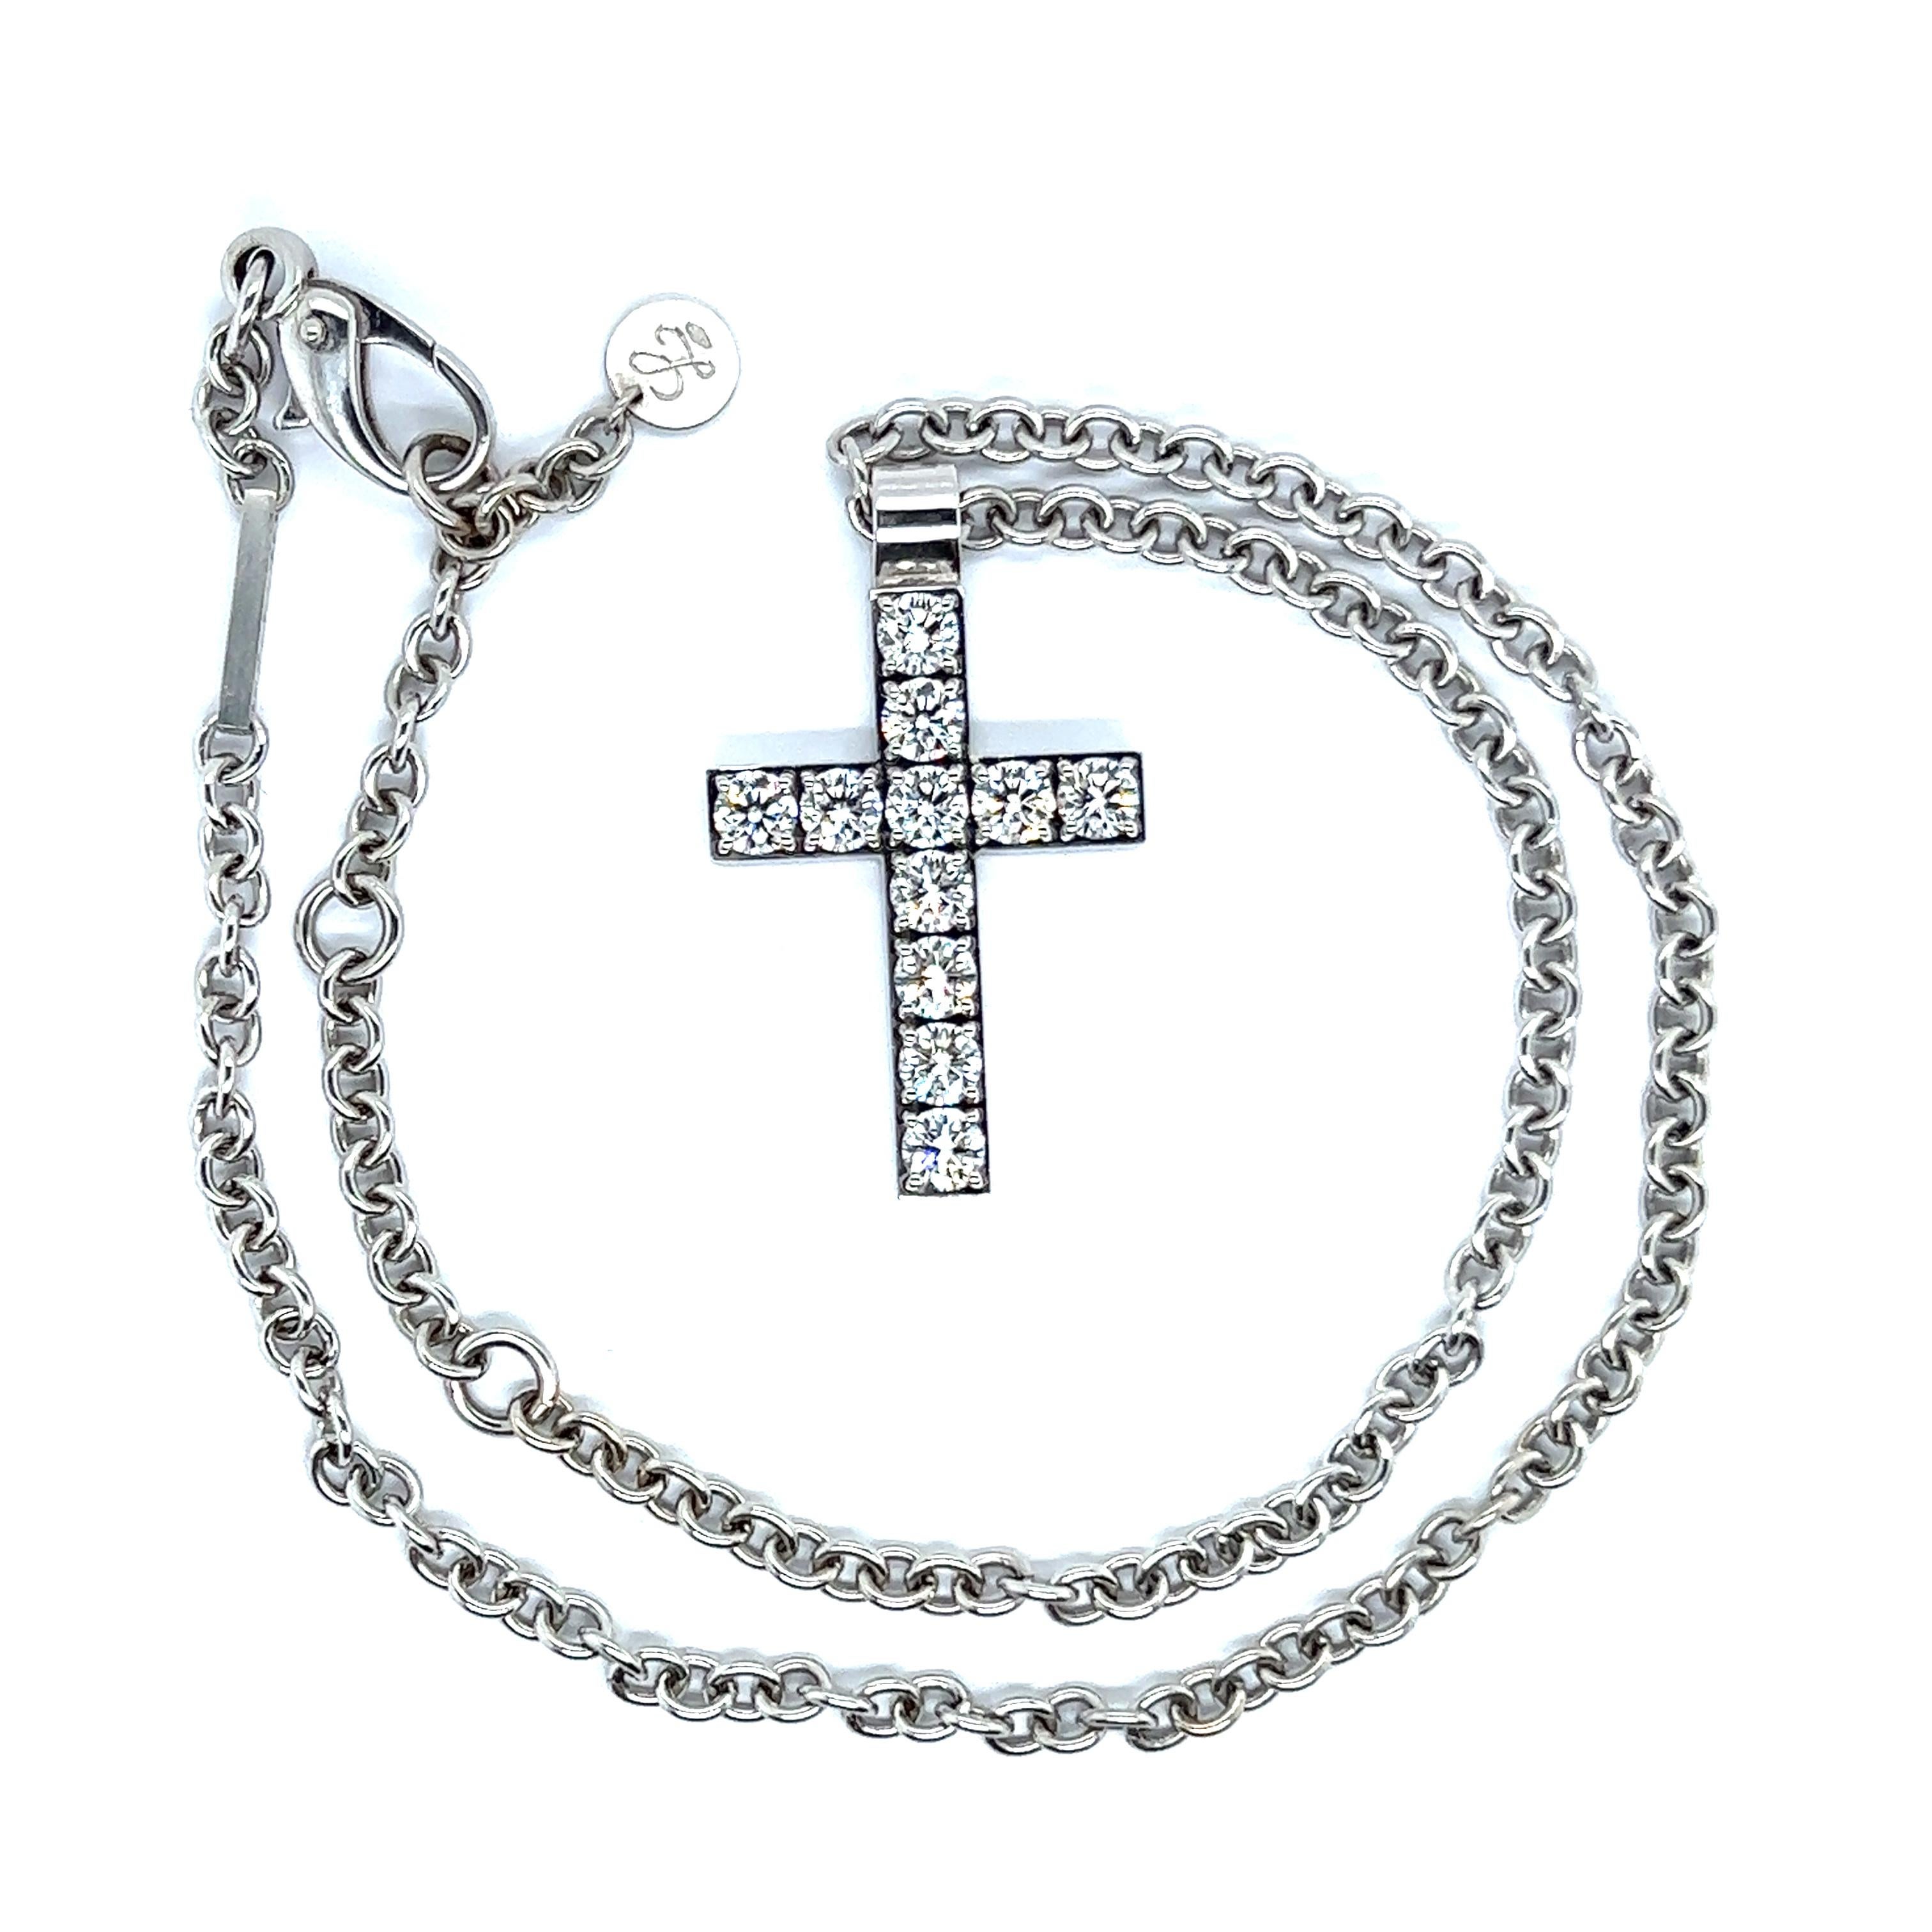 Crafted in 18k white gold, this impressive diamond cross is set with 11 brilliant-cut diamonds totaling 3.30 carats. Each diamond of fine D/if quality is accompanied by one GIA report and 10 IGI reports. 

Modern pendant is paired with a matching